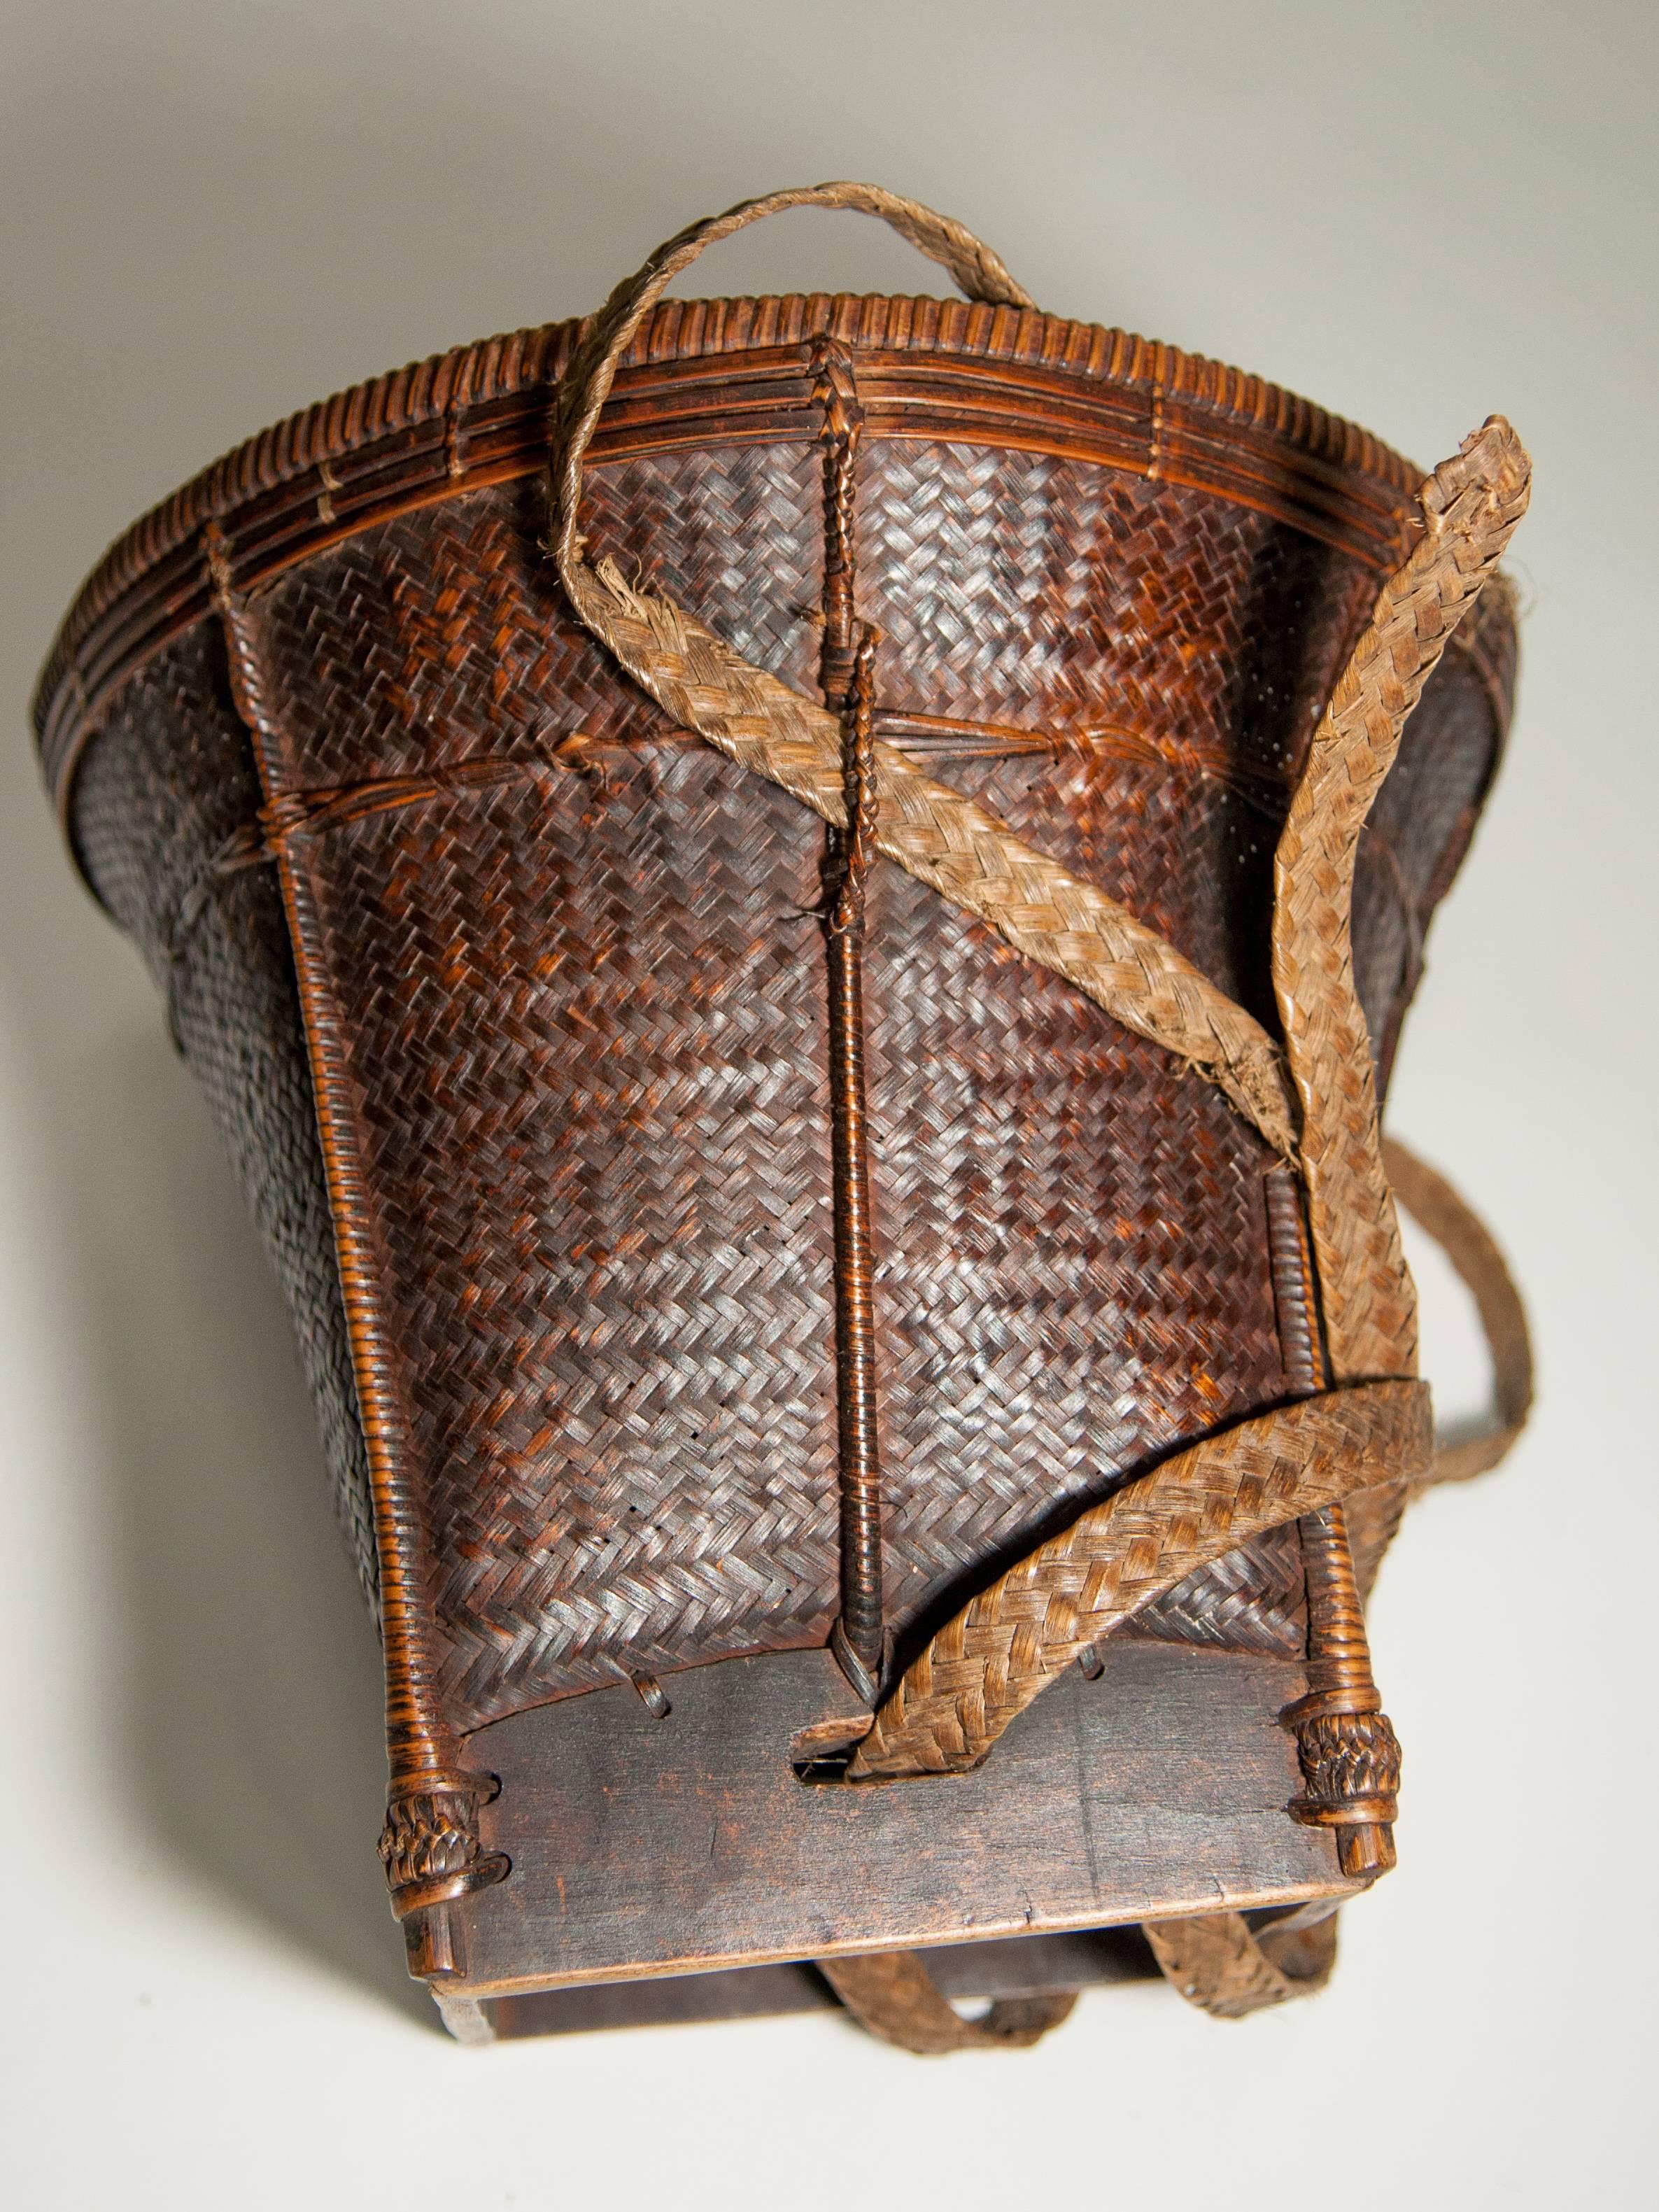 Tribal Collecting Basket from the Ata Pue Area of Laos, Mid-20th Century, Bamboo 7